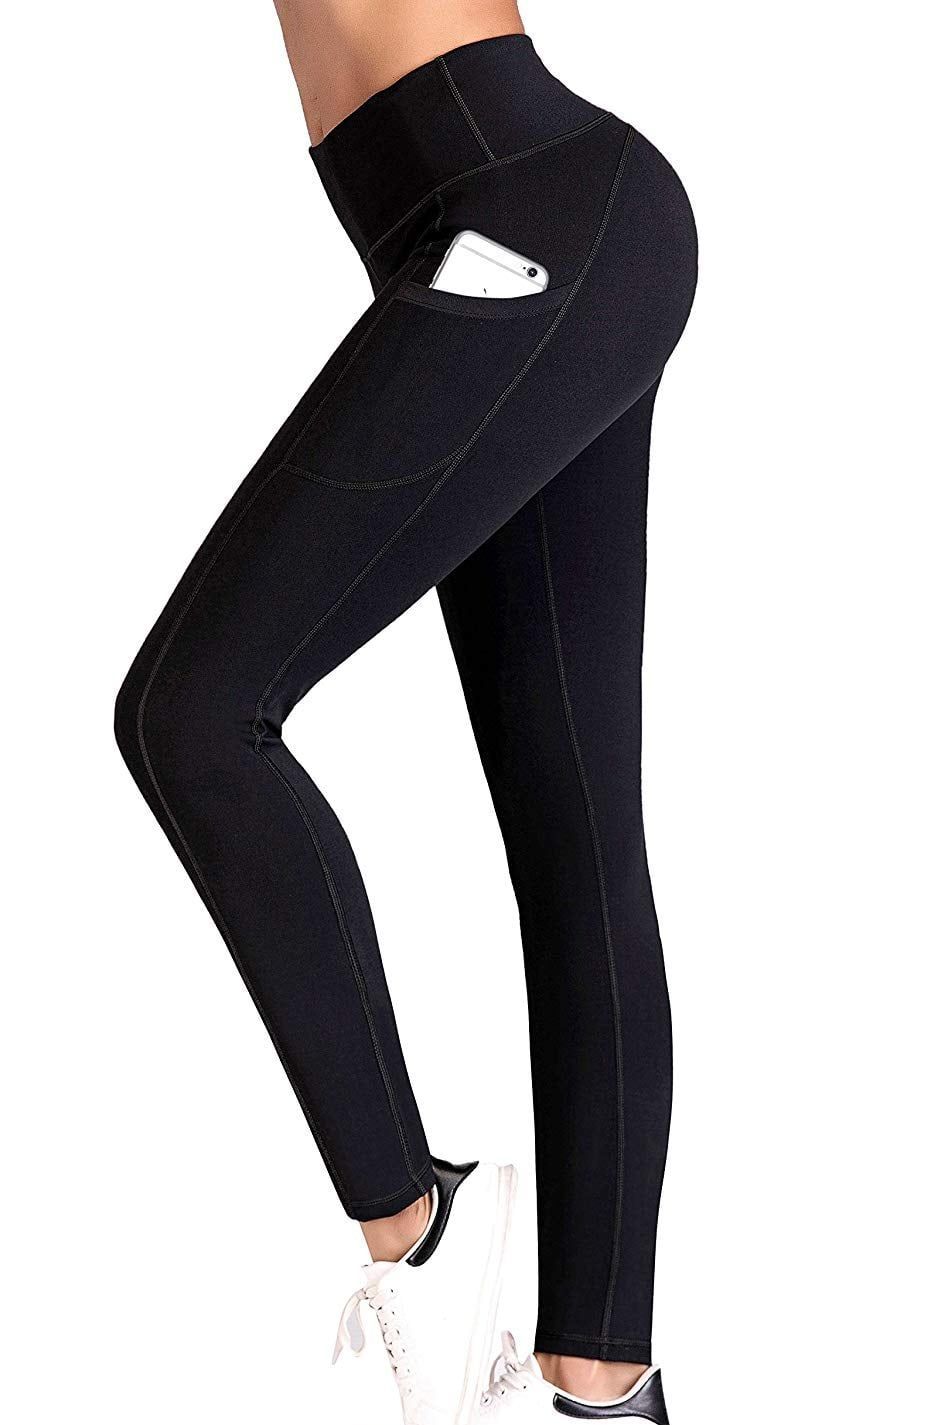 Cotton Capri Yoga Pants For Women Yoga Pants With Pockets Workout Leggings  Pack Cotton Capris Ultra High Waisted Leggings For Women Winter Leggings  Dressy Yoga Pants For Work Brown Flared Leggings at